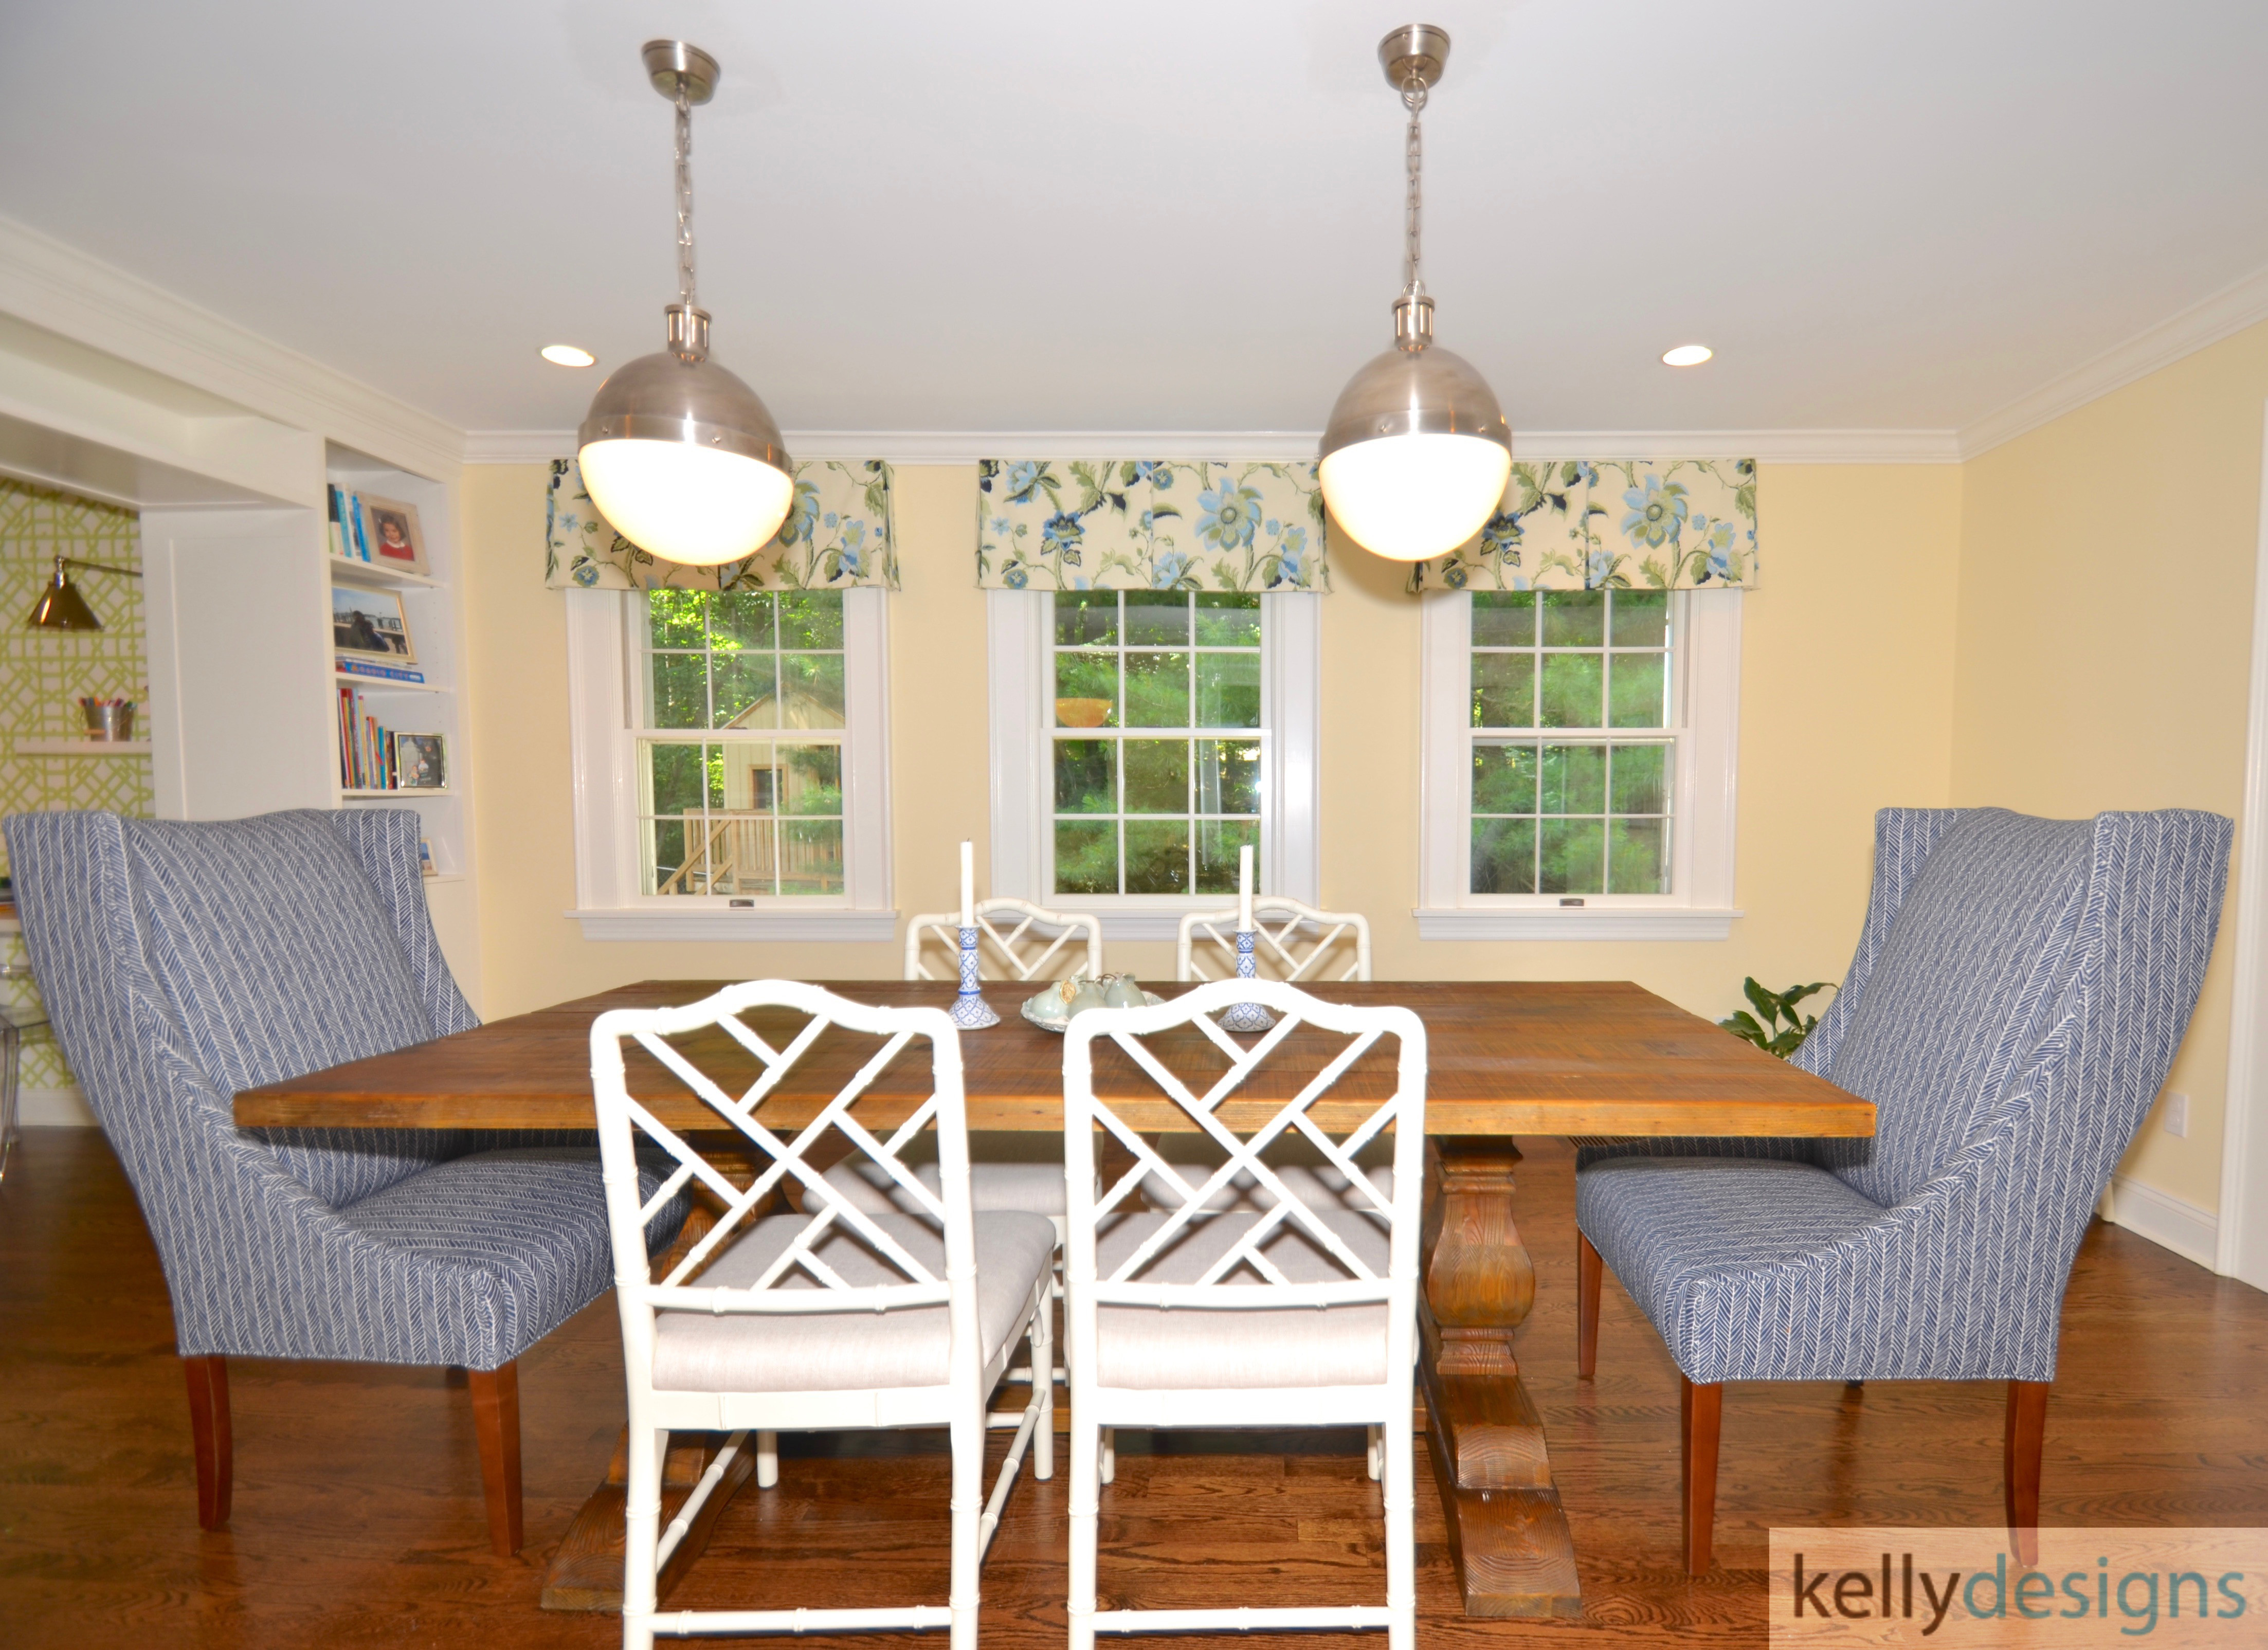 Preppy with a Purpose - Kitchen Dining Room - Interior Design by kellydesigns